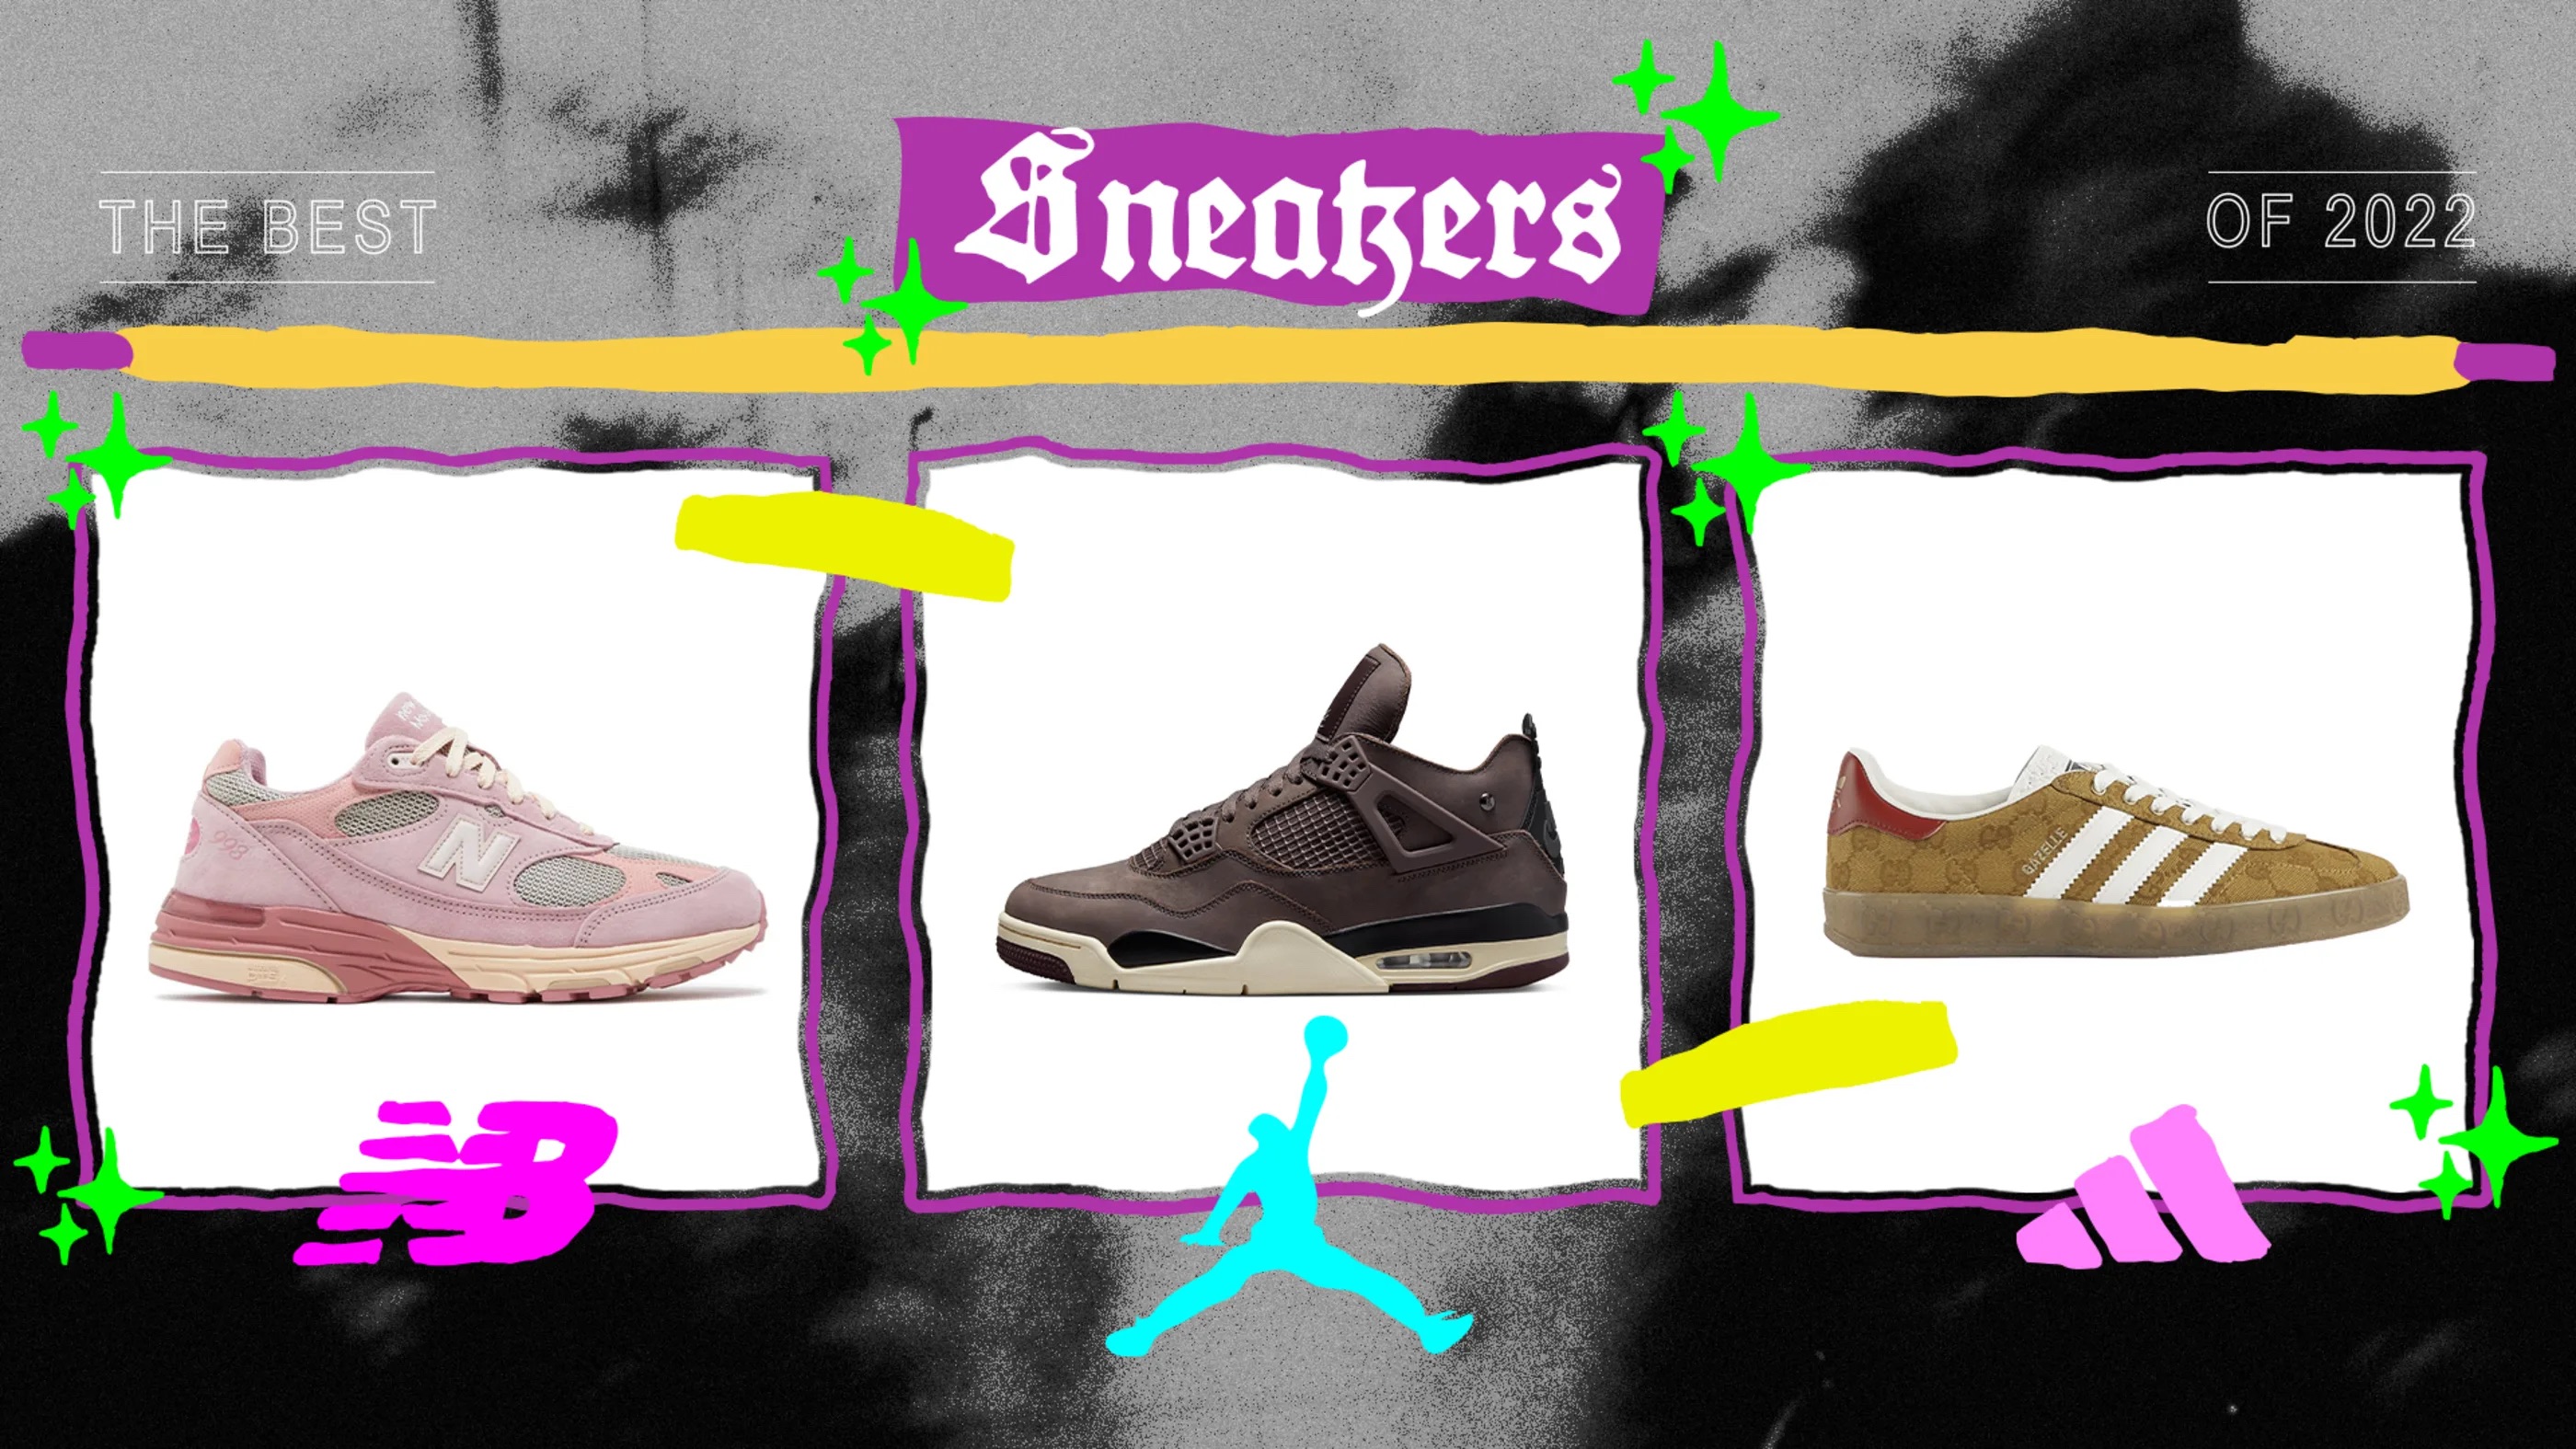  COMPLEX BEST SNEAKERS OF 2022 年度最具人氣球鞋十大